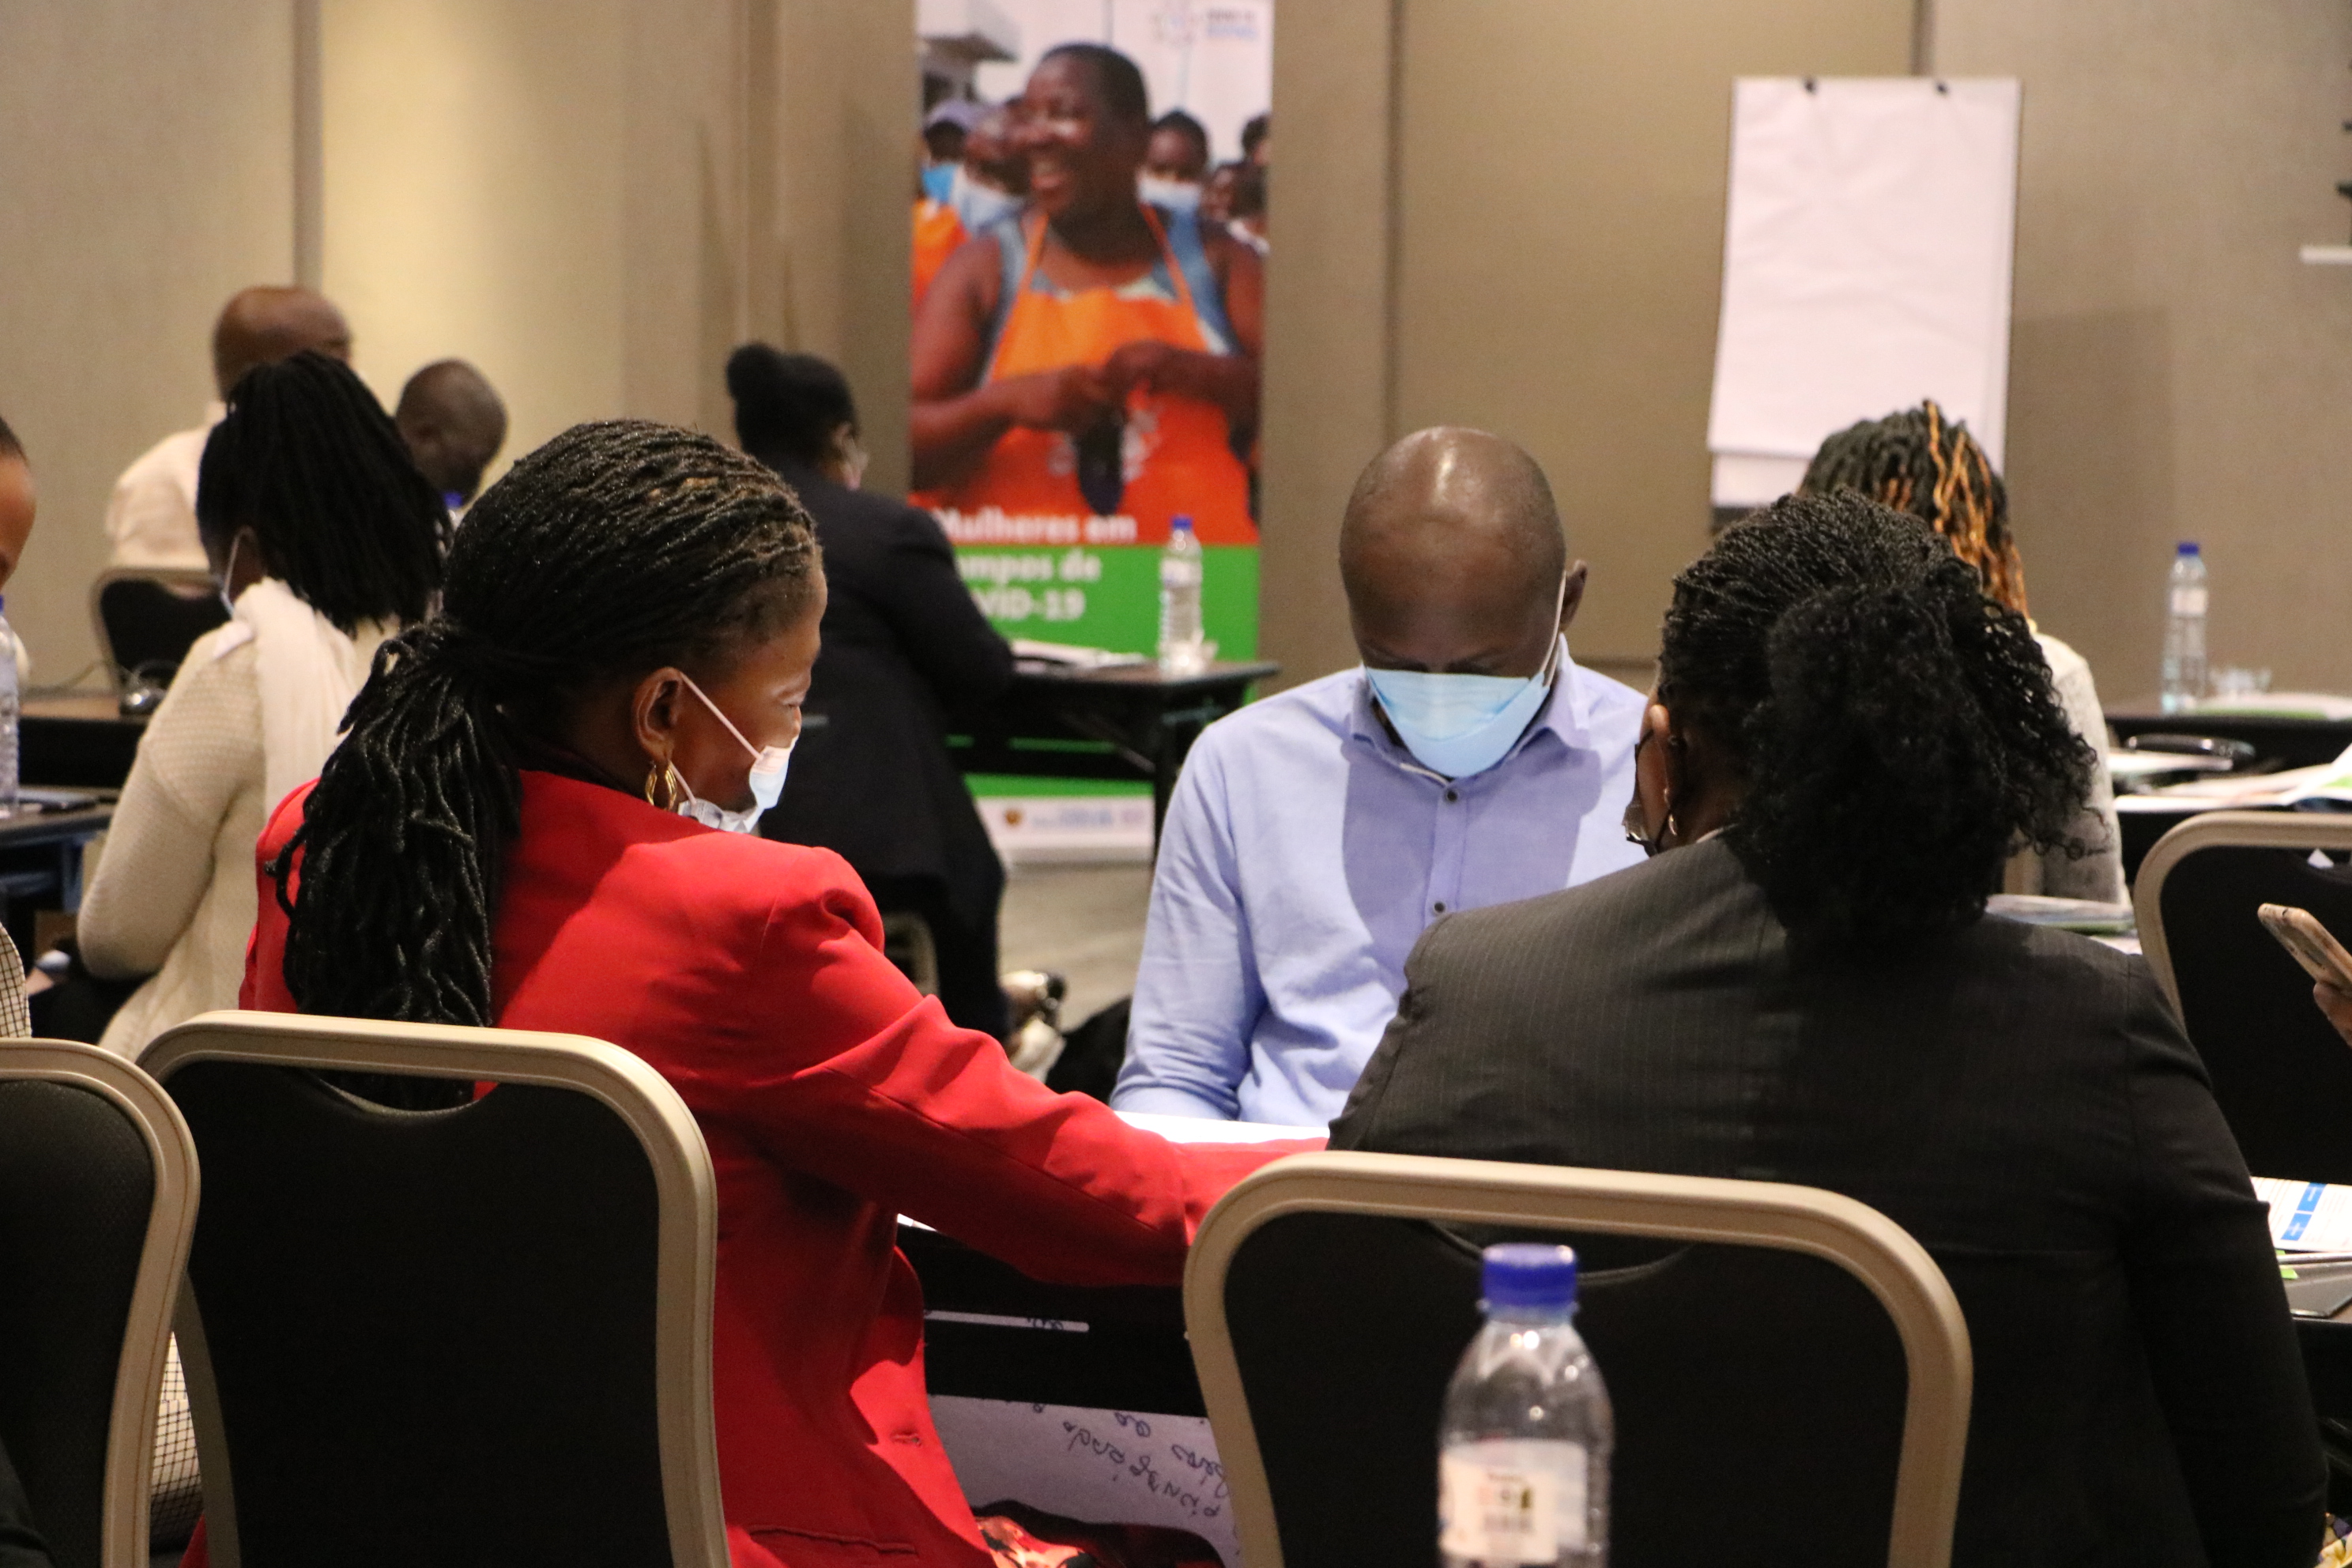 Image 4: Government Planners engaged in a workshop during the training. (C. Costa / UN Women)